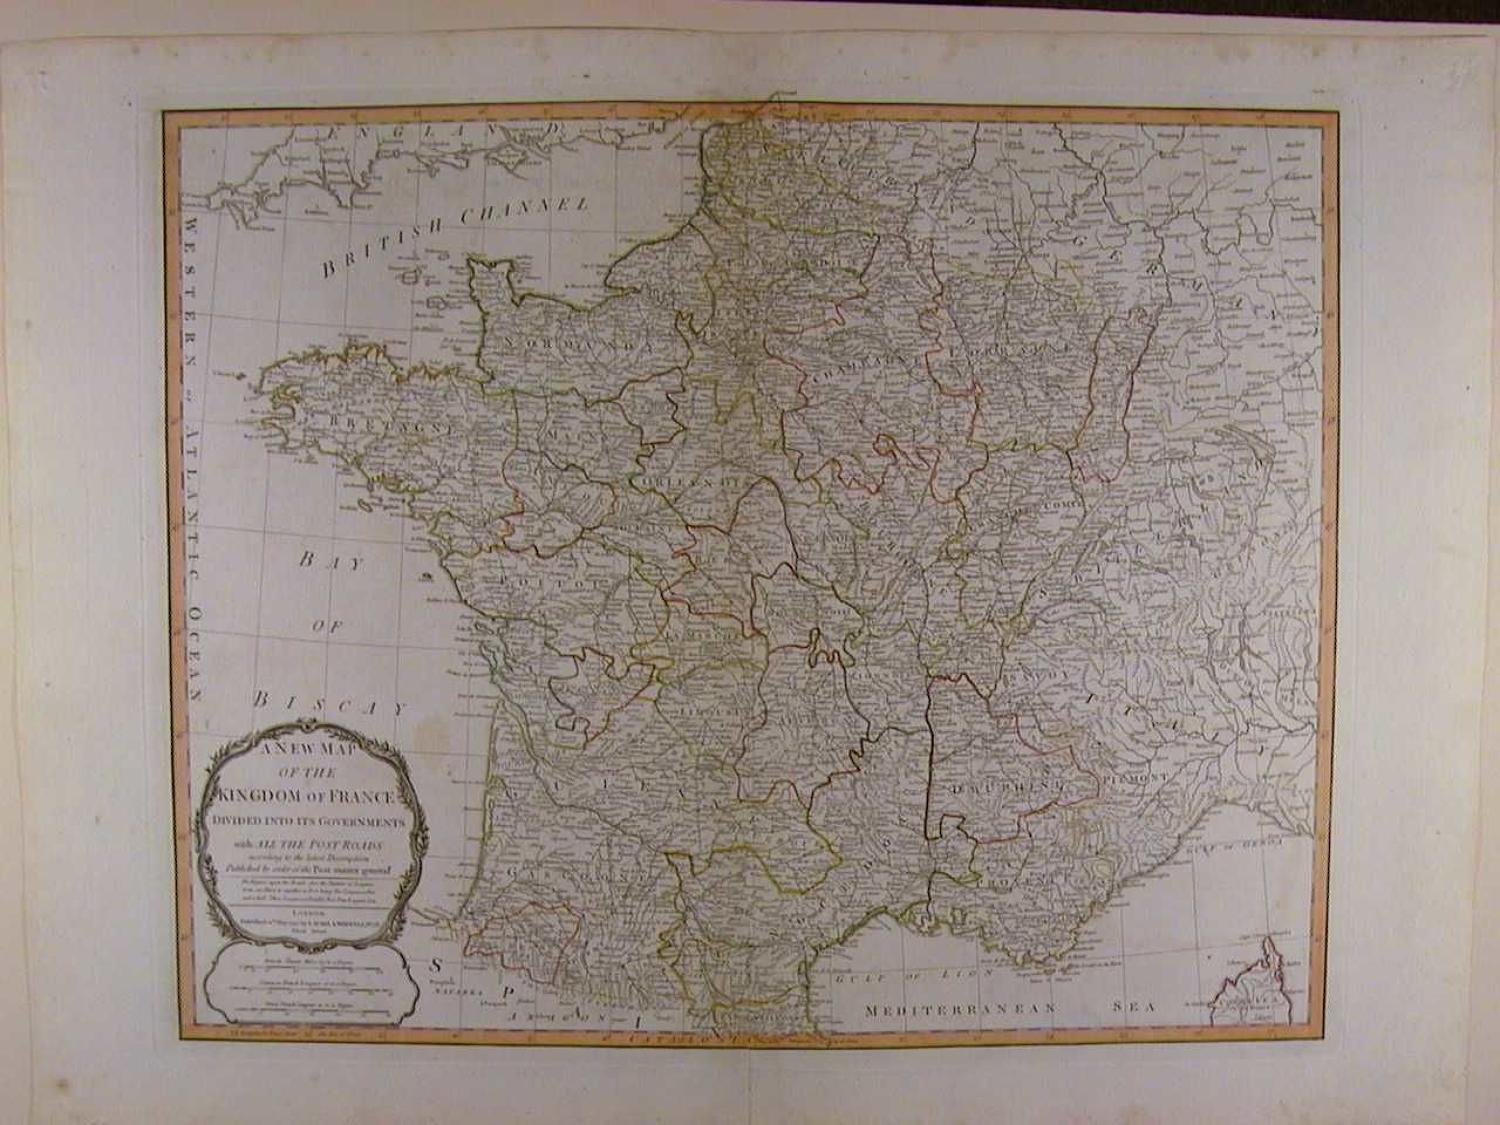 A New Map of the Kingdom of France by Robert Laurie / James Whittle